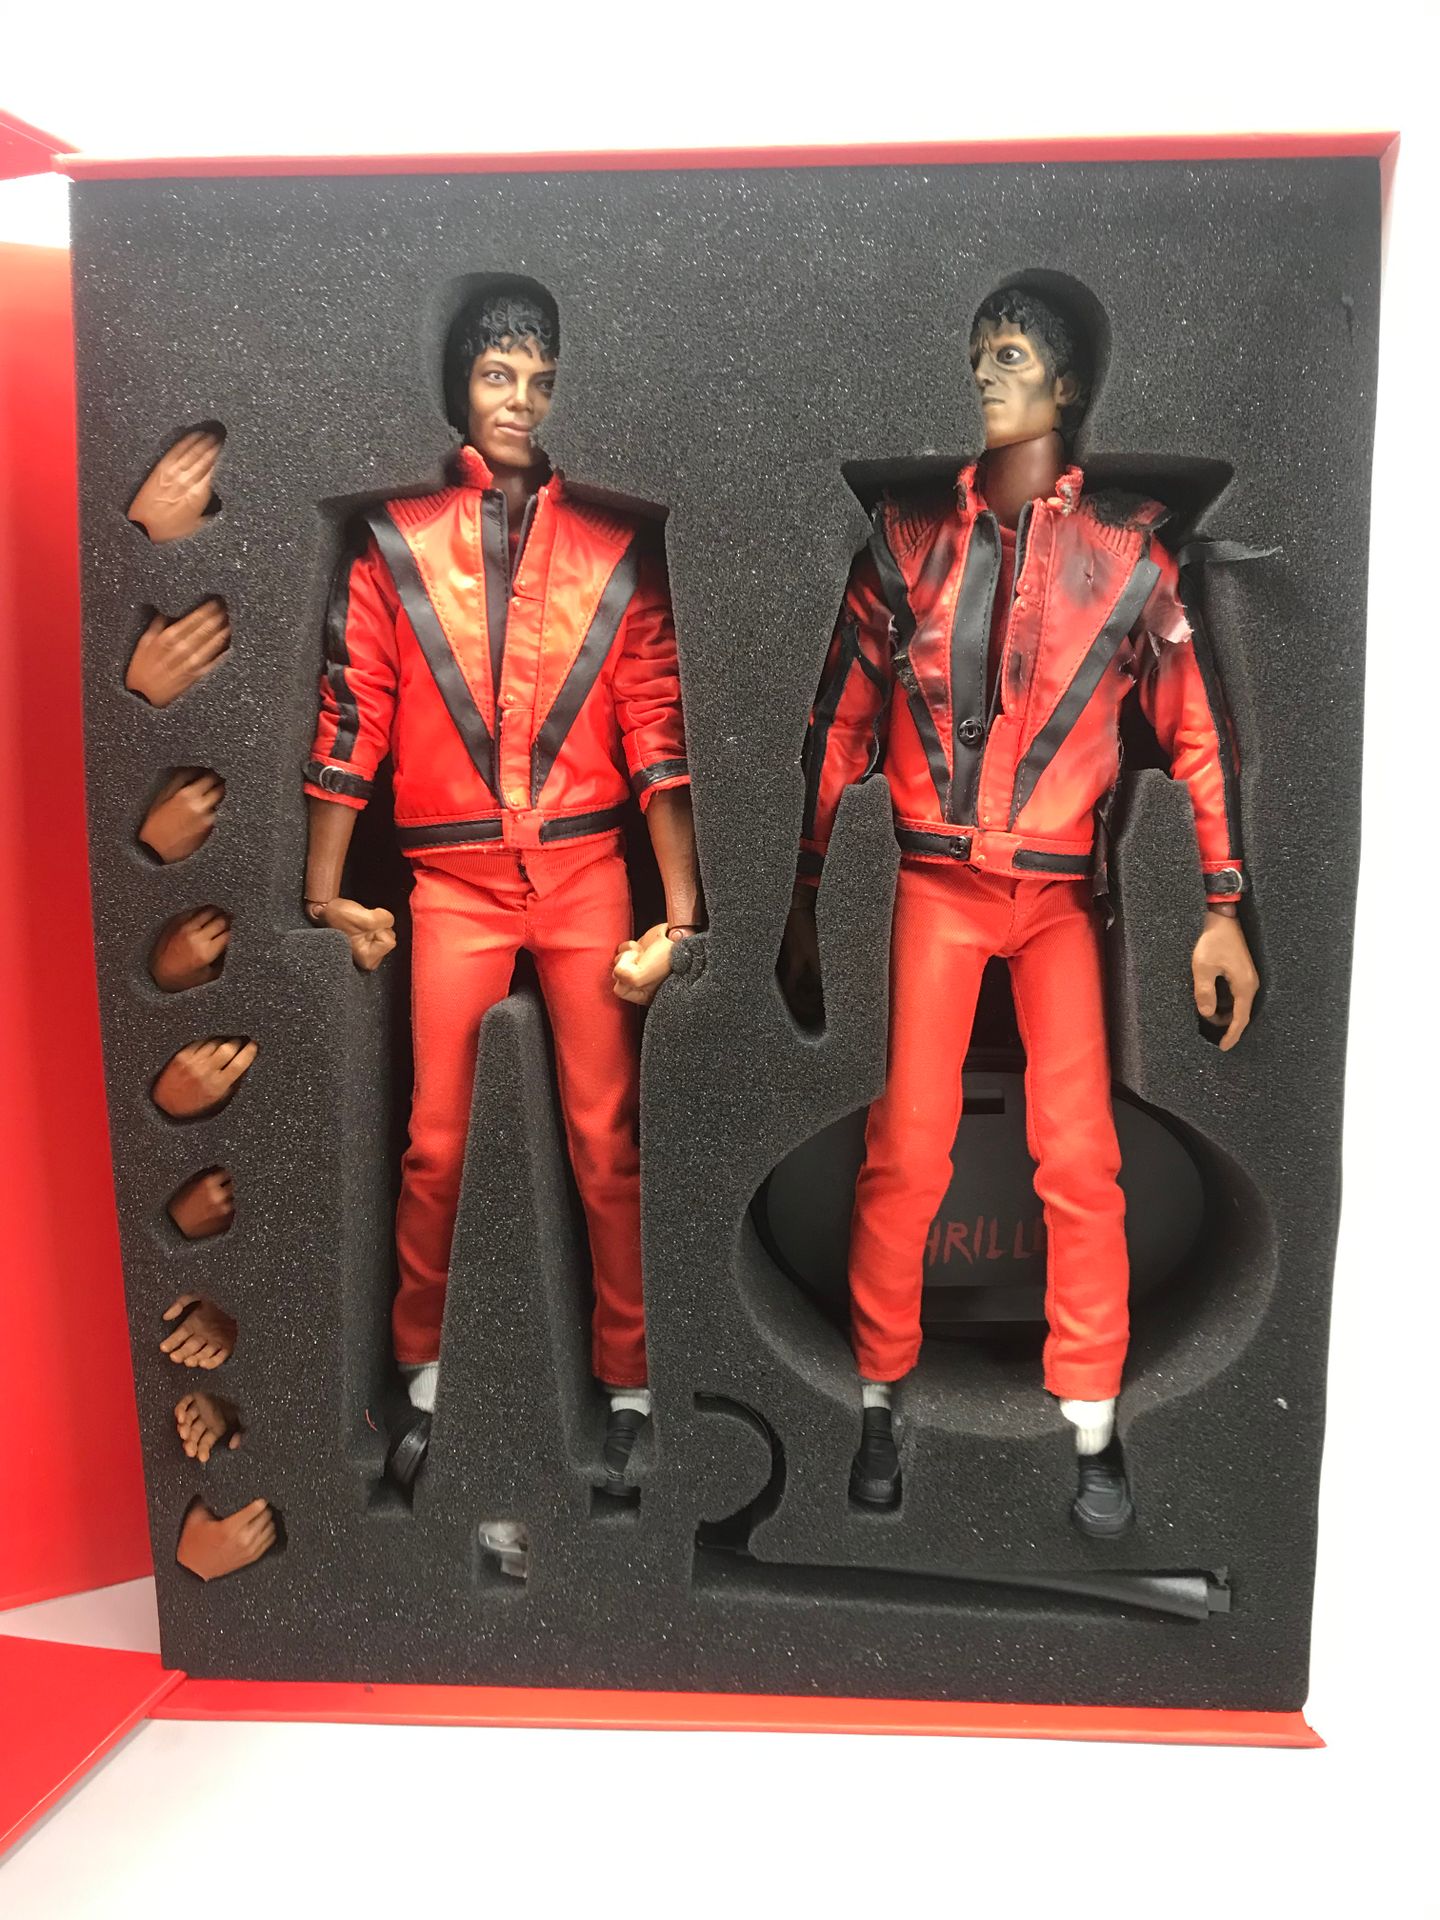 Null HOT TOYS, Michael JACKSON
Collector's box set including two figurines of th&hellip;